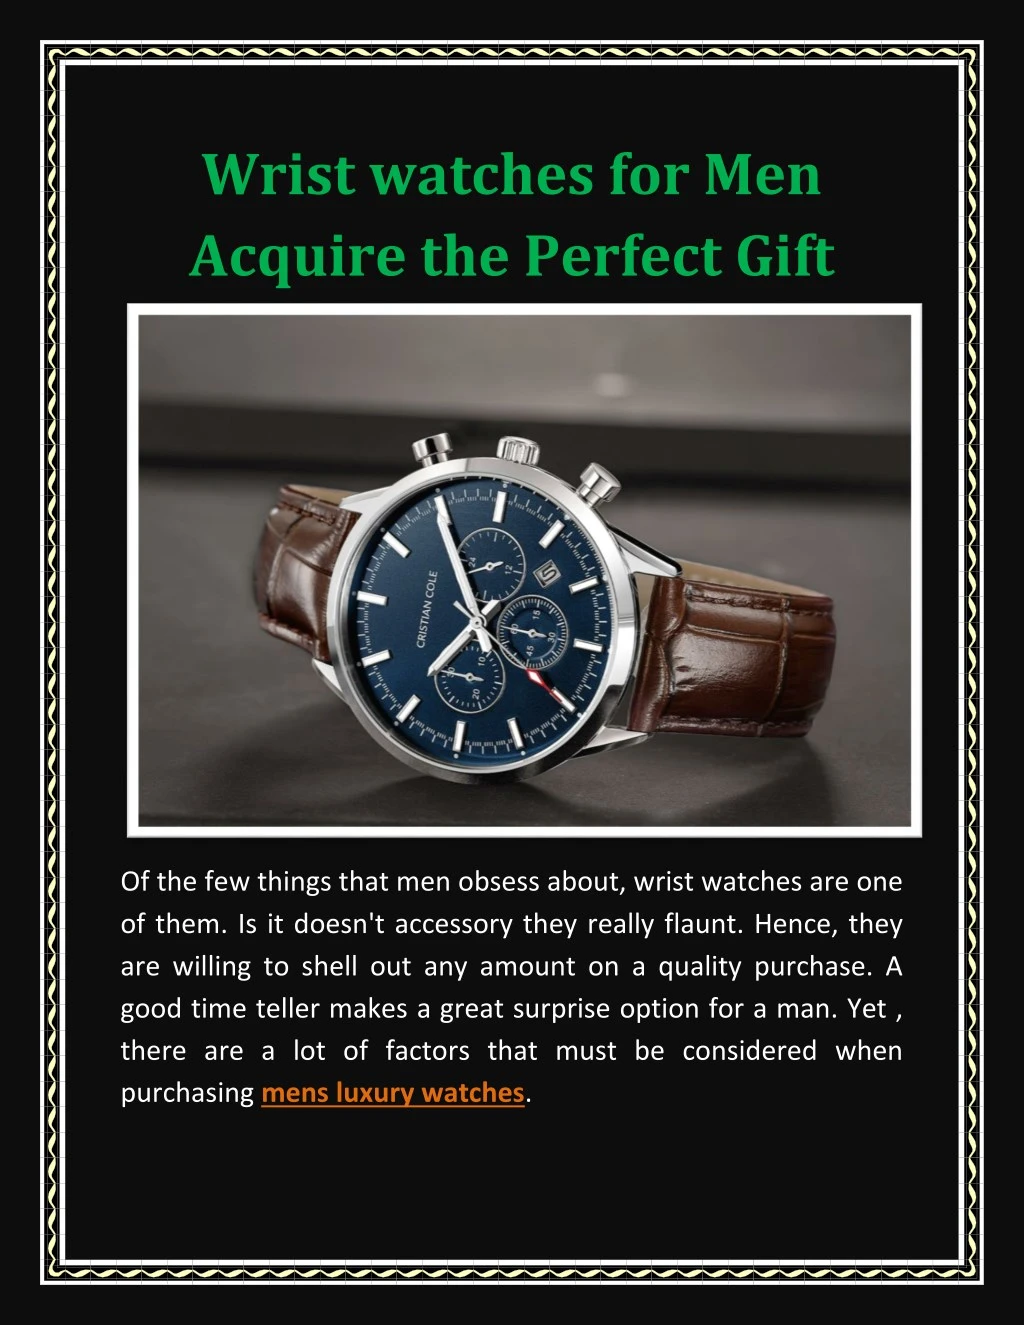 wrist watches for men acquire the perfect gift